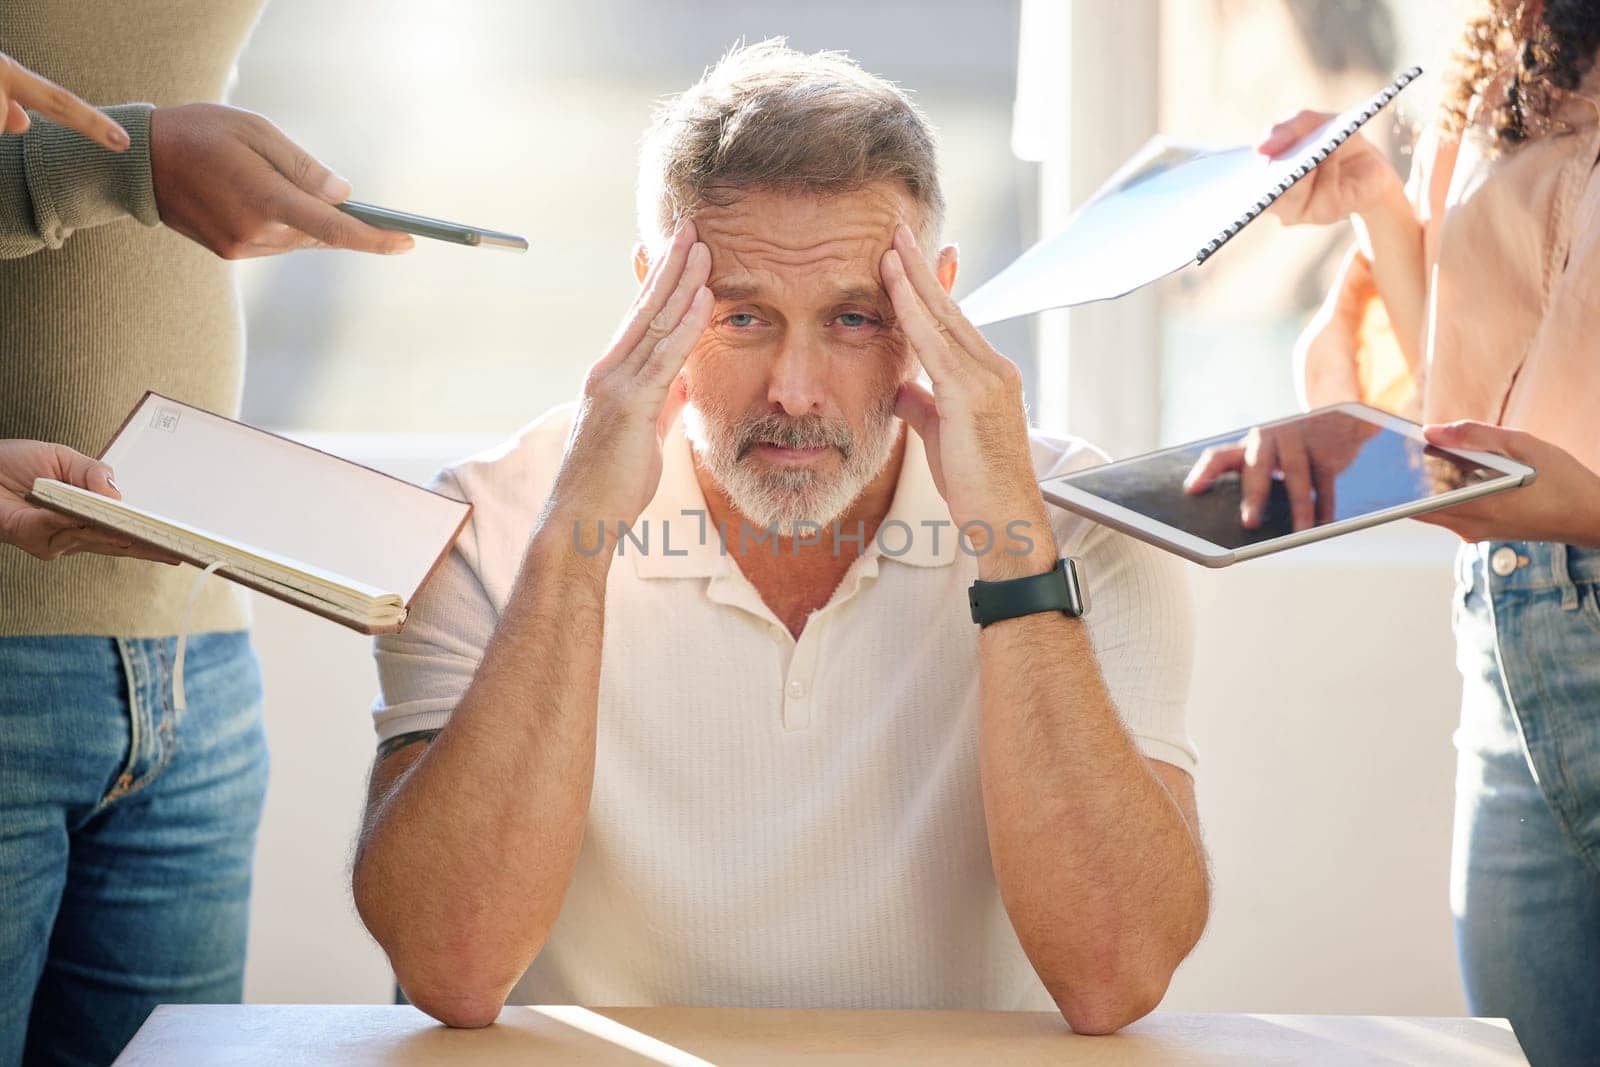 Businessman, portrait and headache with documents for time management, anxiety or stress in chaos or workload. Frustrated, tired or mature man in burnout, pressure or deadline at busy workplace.